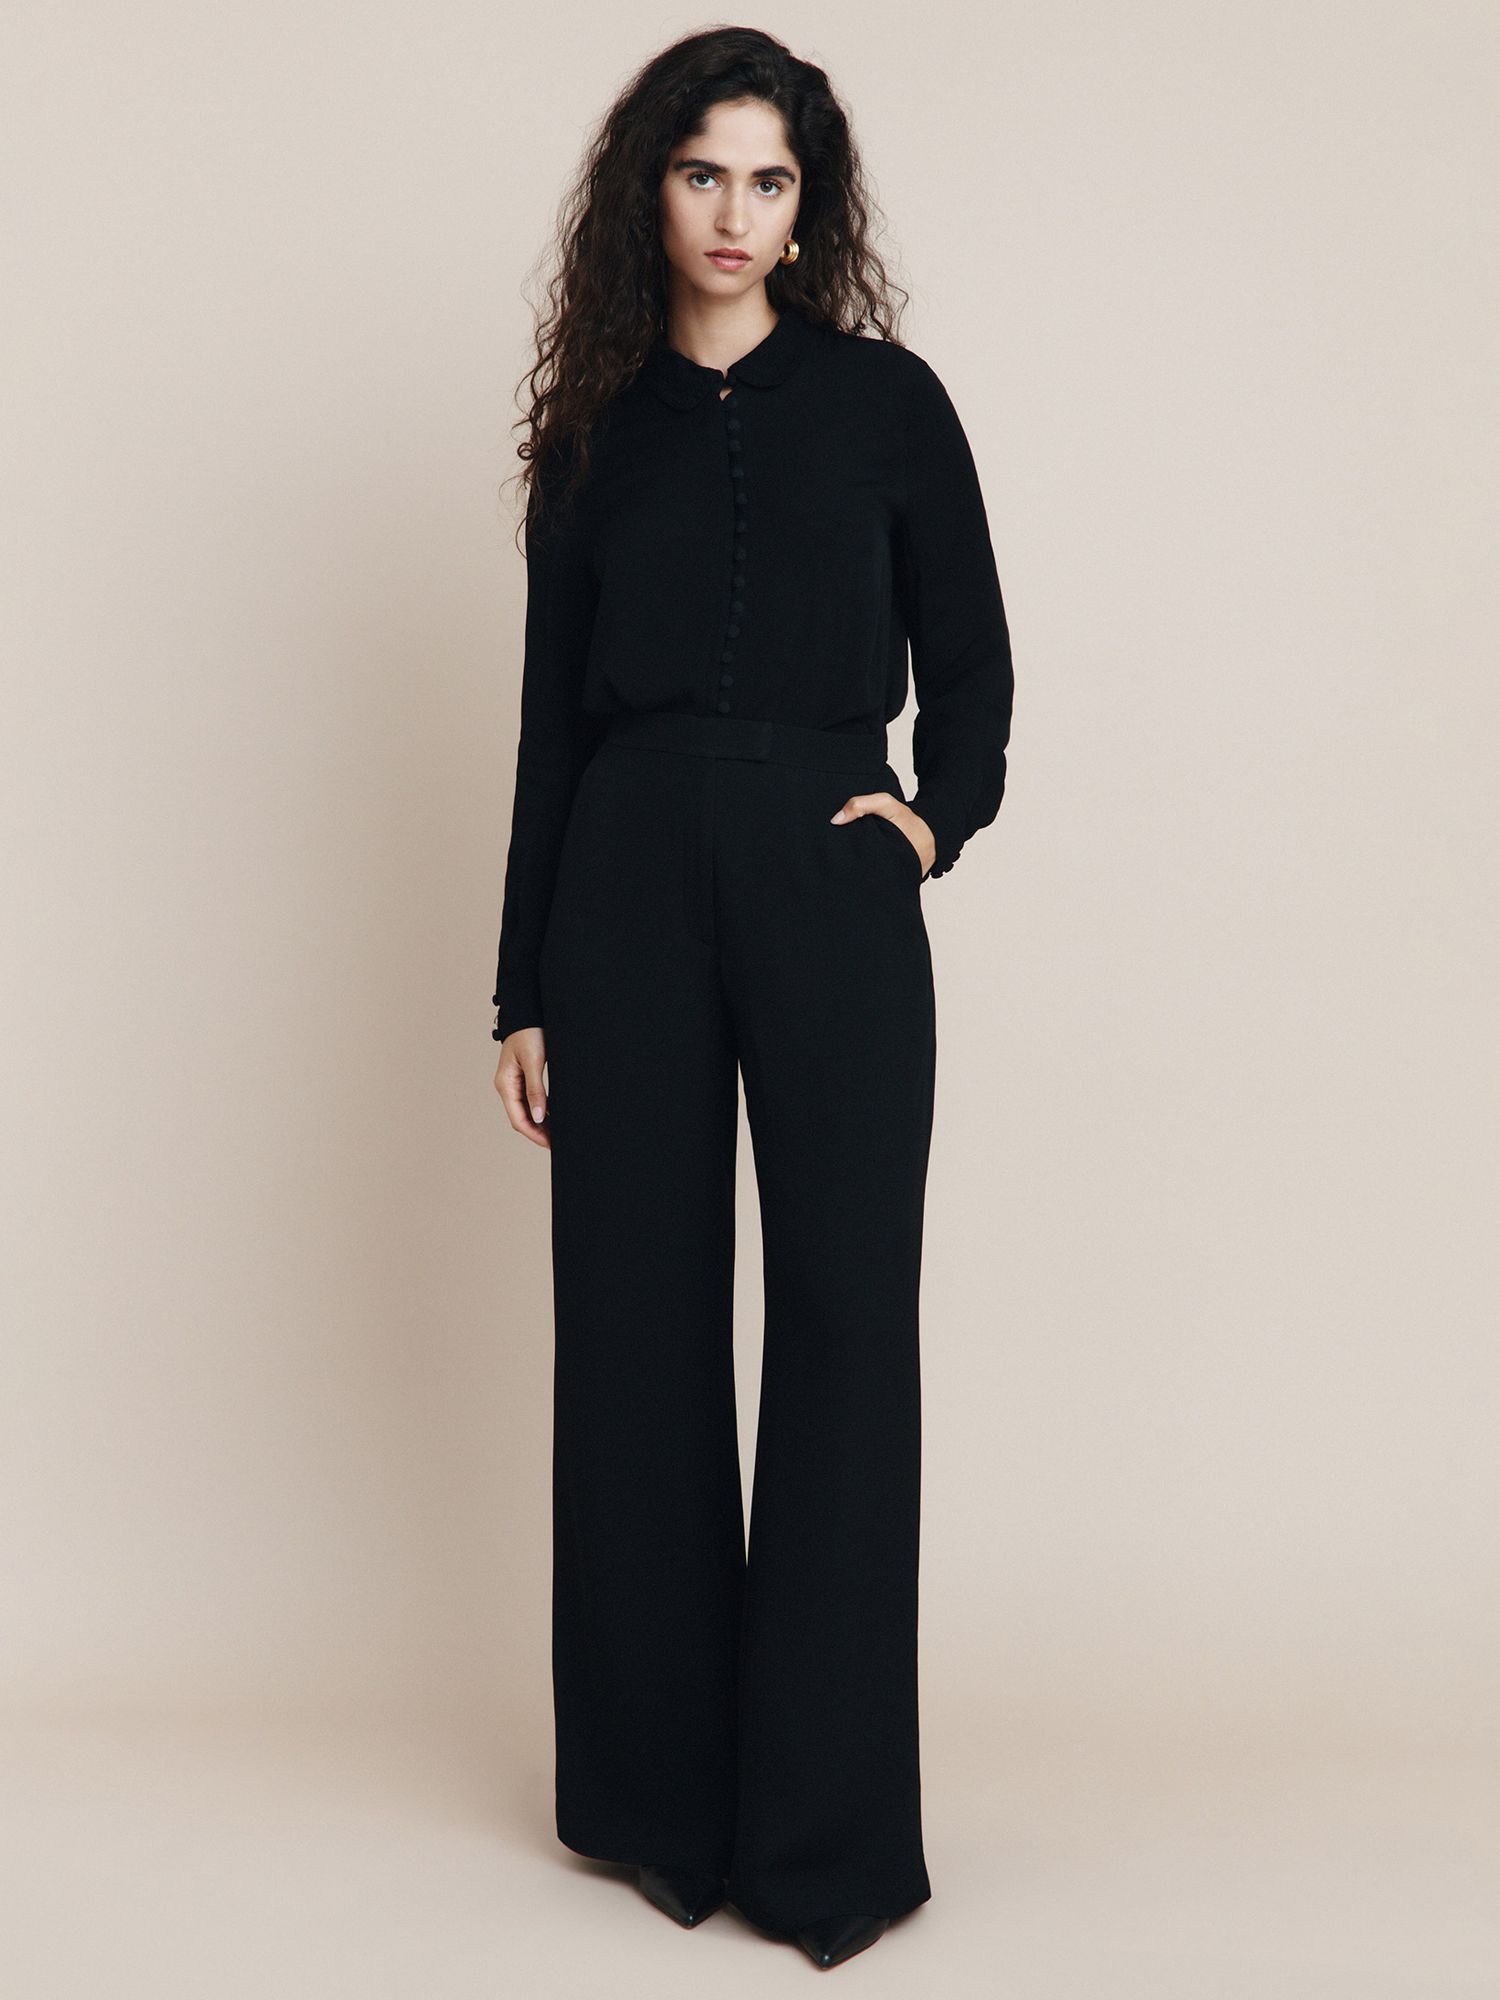 Buy Ghost Alexa Flared Trousers Online at johnlewis.com